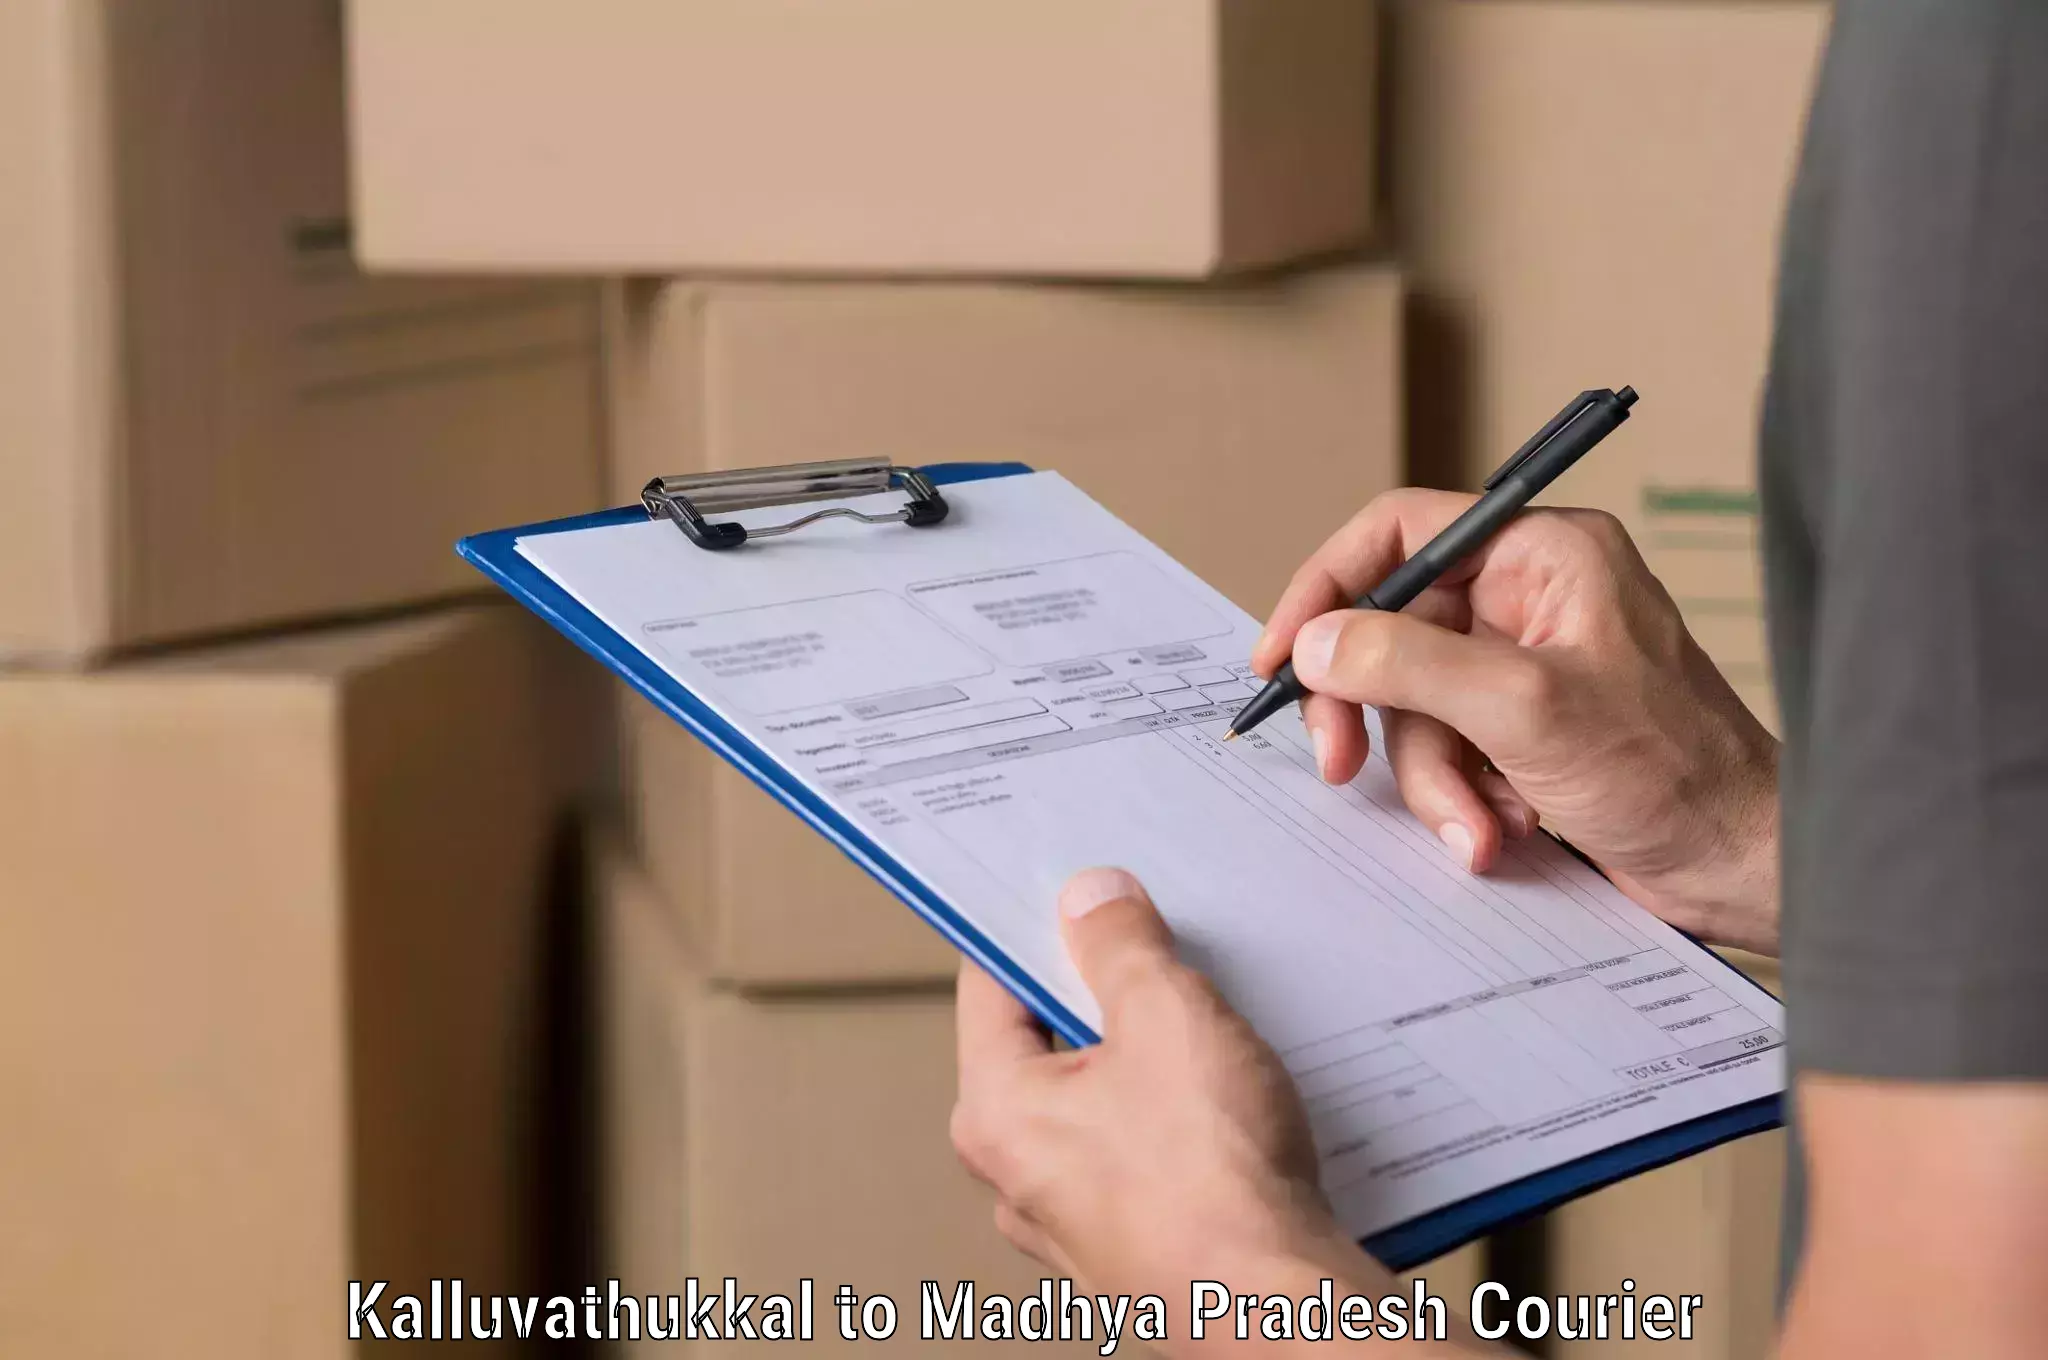 Global shipping networks Kalluvathukkal to Chand Chaurai